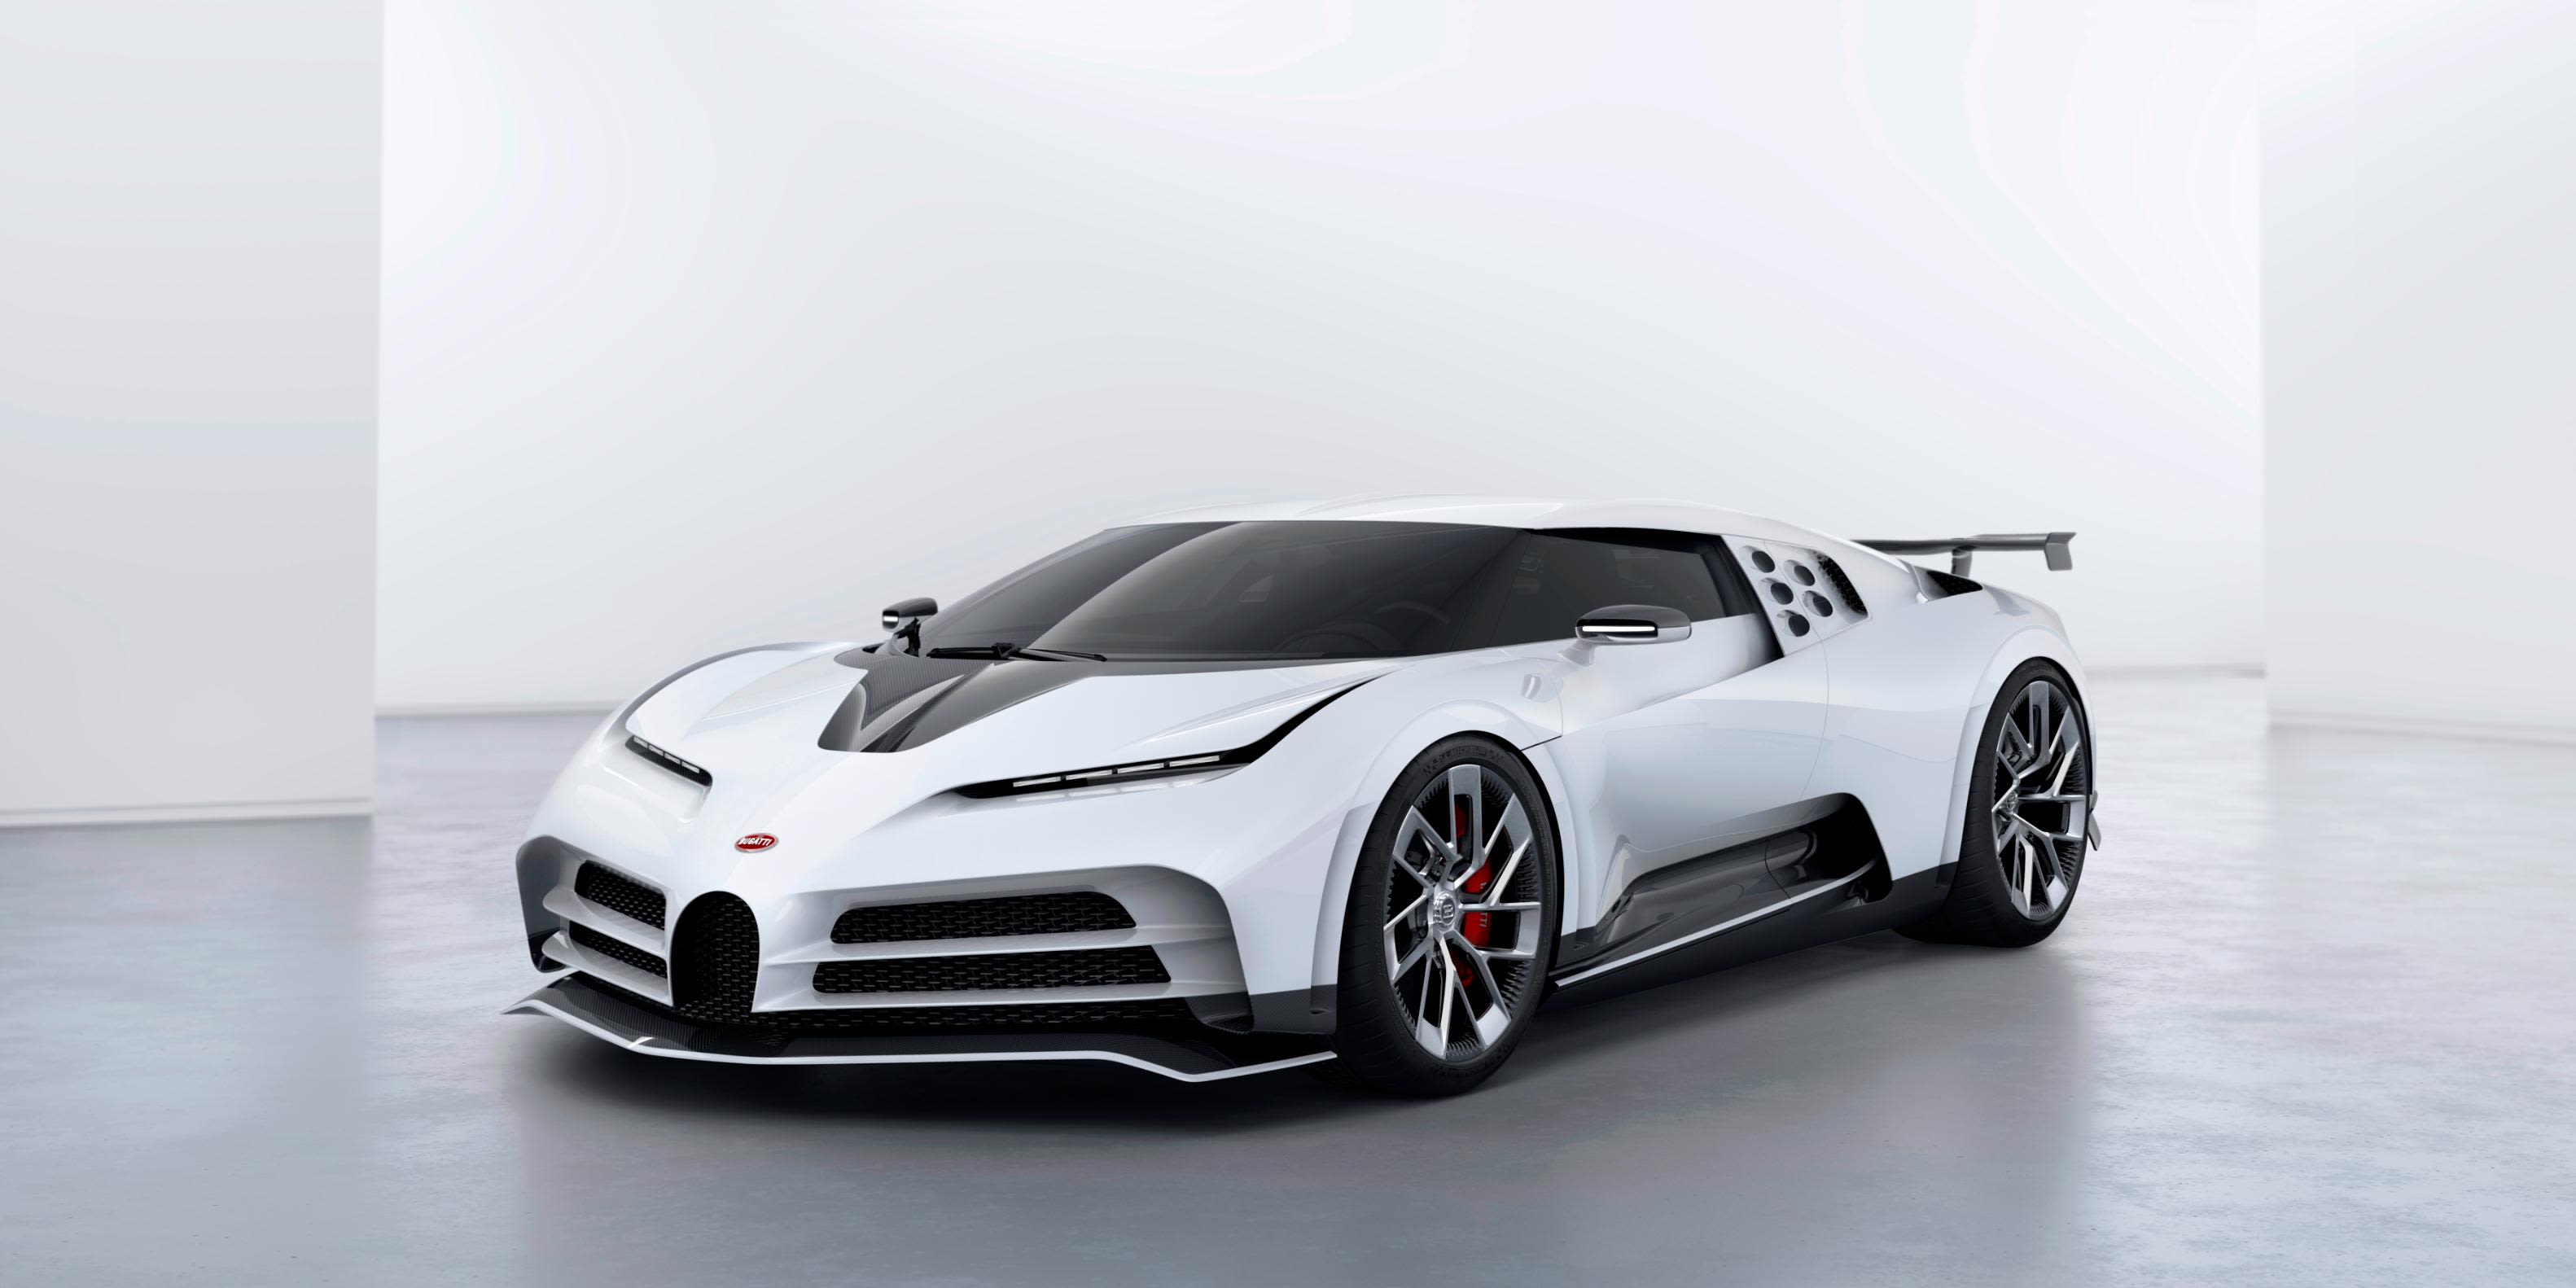 Bugatti is making 10 of these $9 million supercars | CNN Business